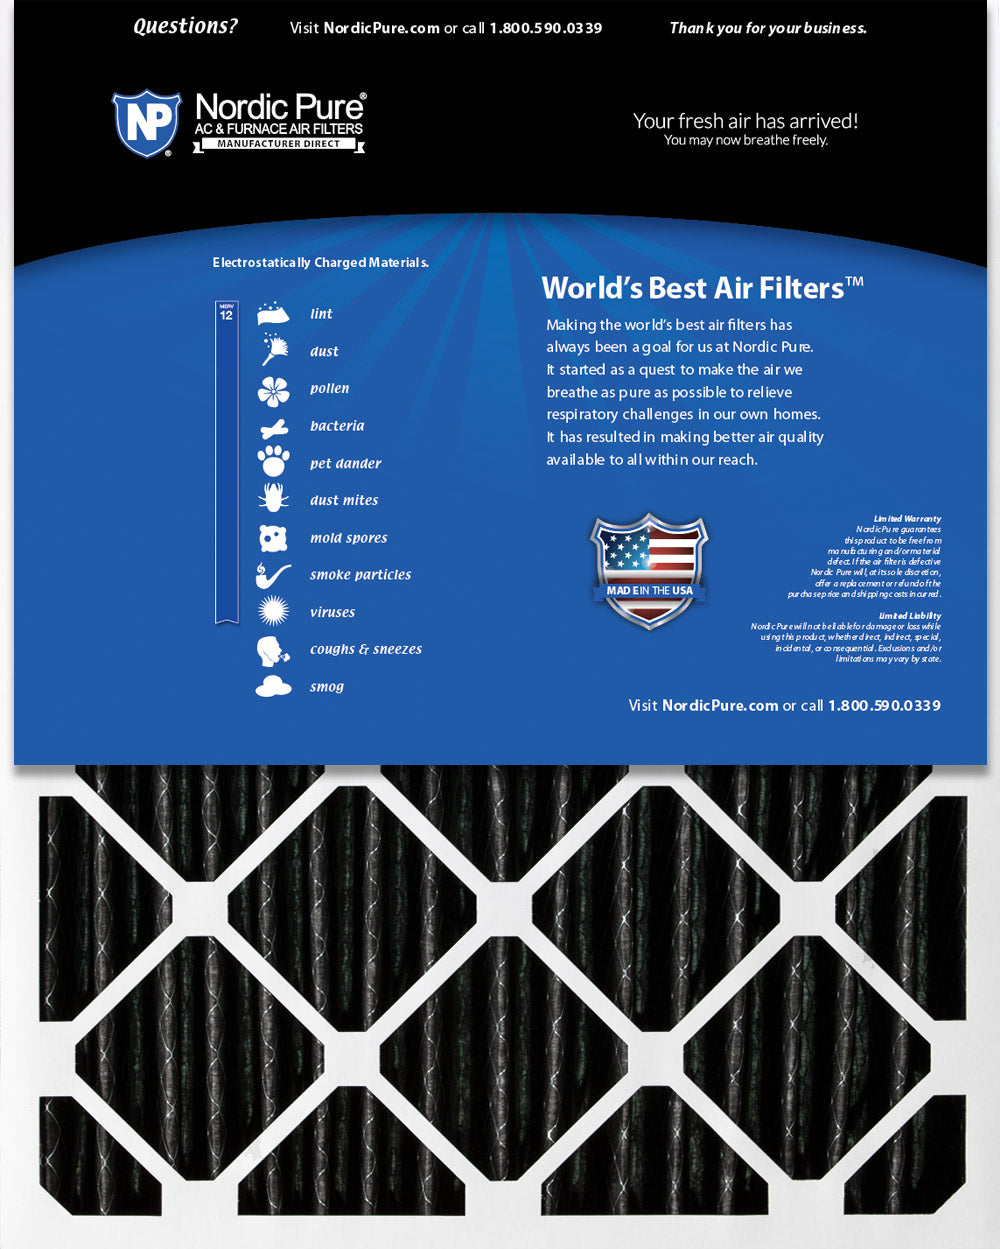 12x24x4 (3 5/8) Furnace Air Filters MERV 12 Pleated Plus Carbon